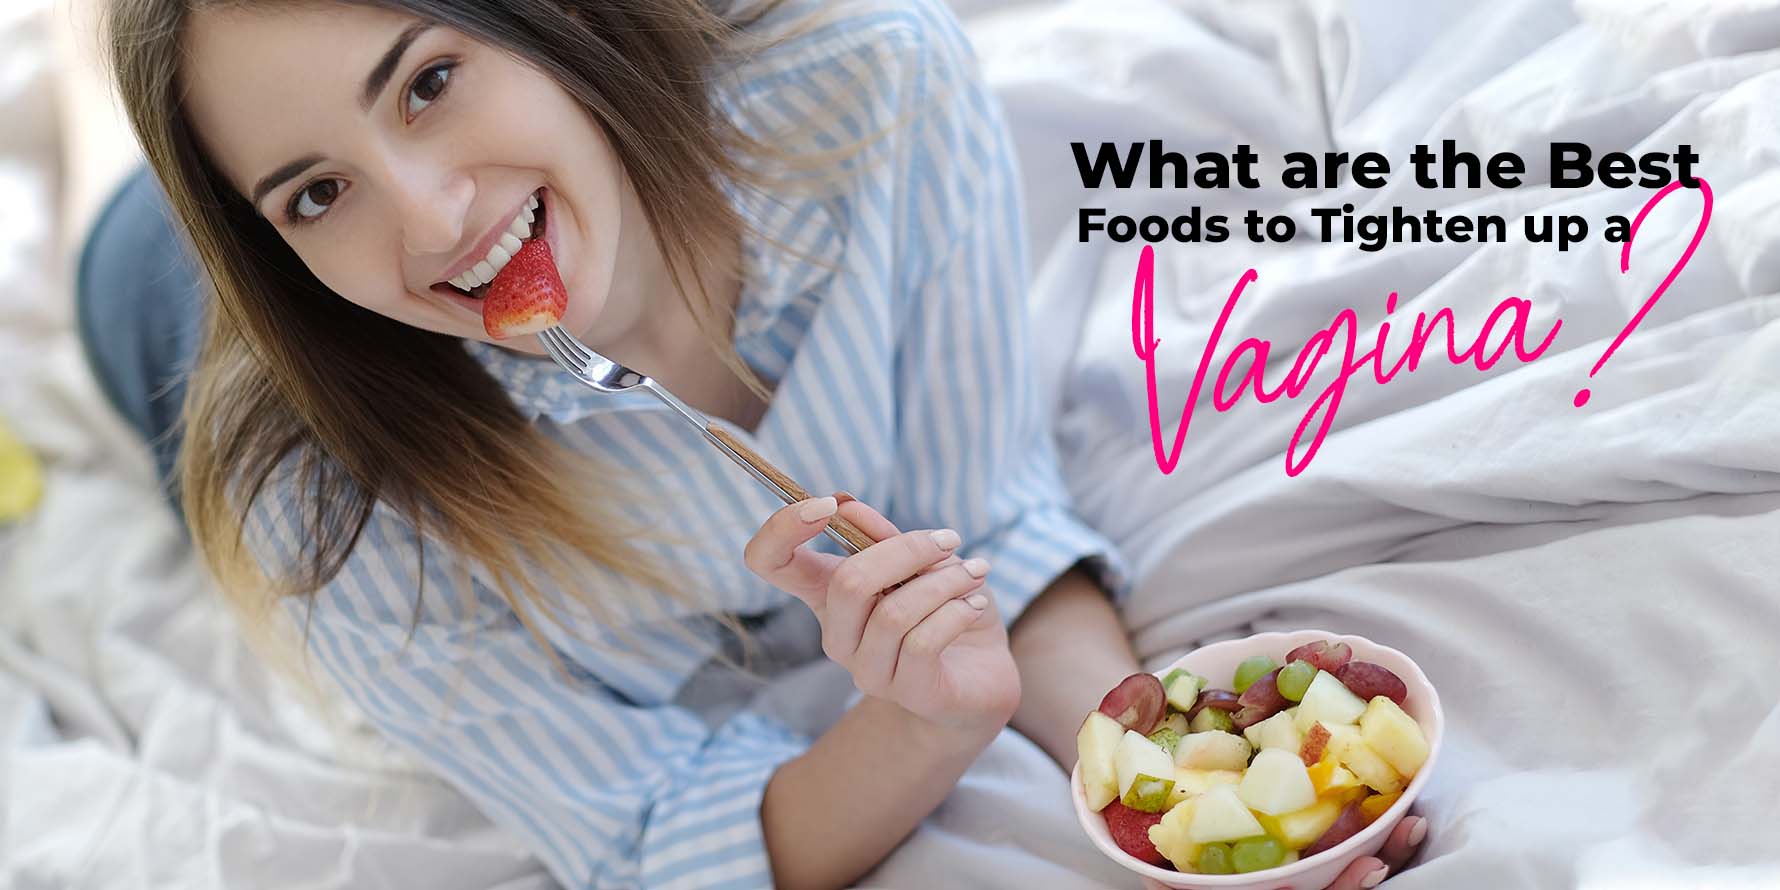 What are the Best Foods to Tighten up a Vagina?